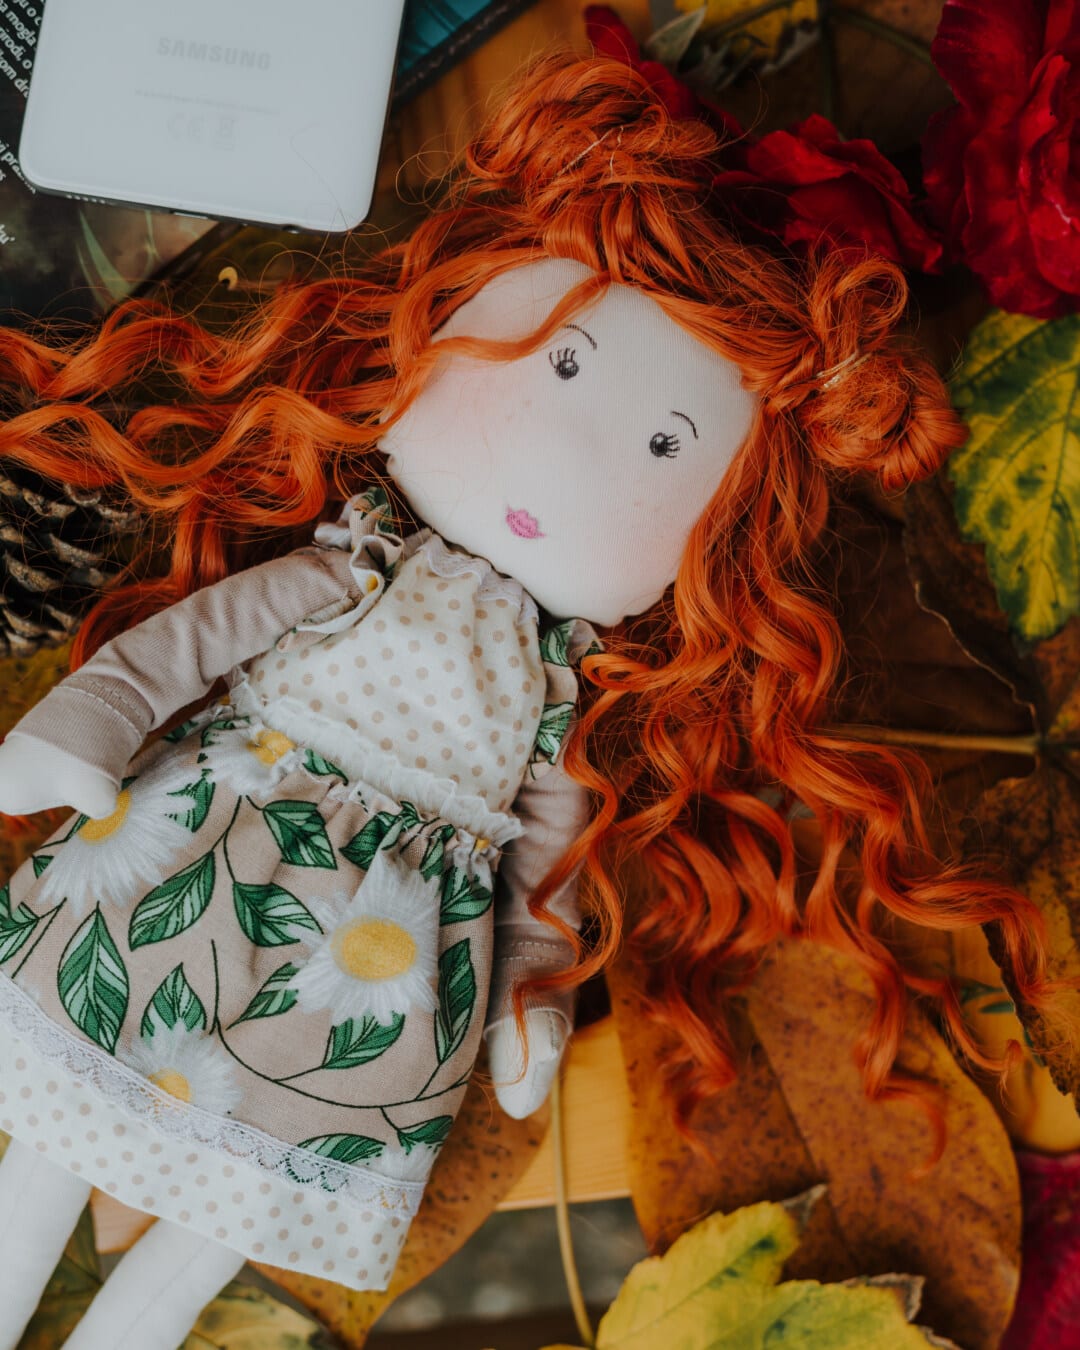 redhead, doll, plush, vintage, toy, color, decoration, still life, face, attractive